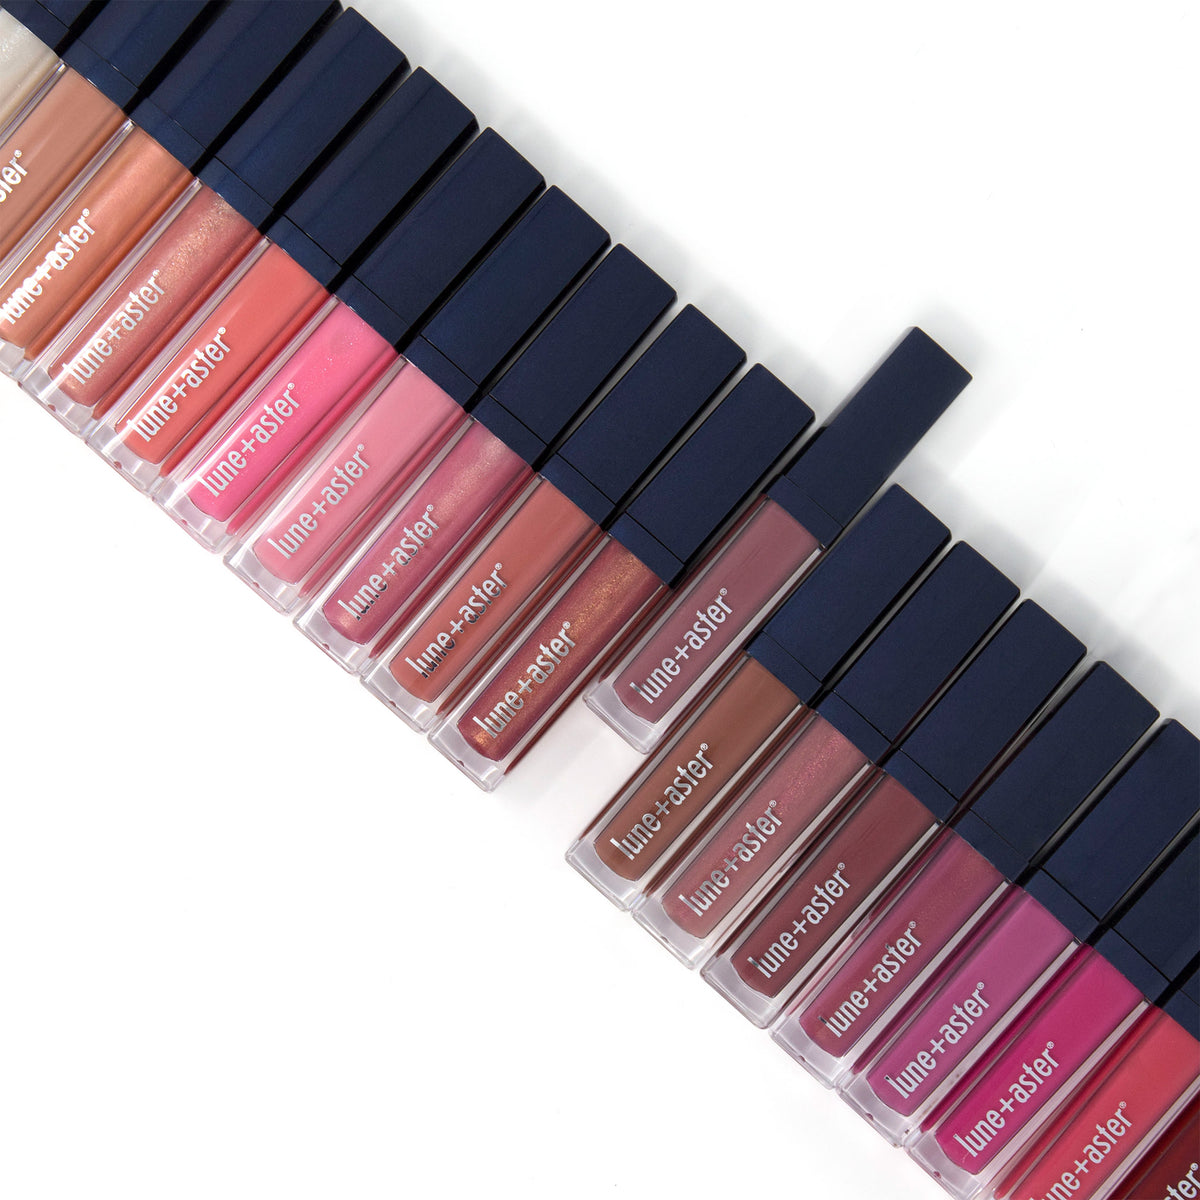 Lune+Aster Vitamin C+E Lip Gloss . This product is in the color pink